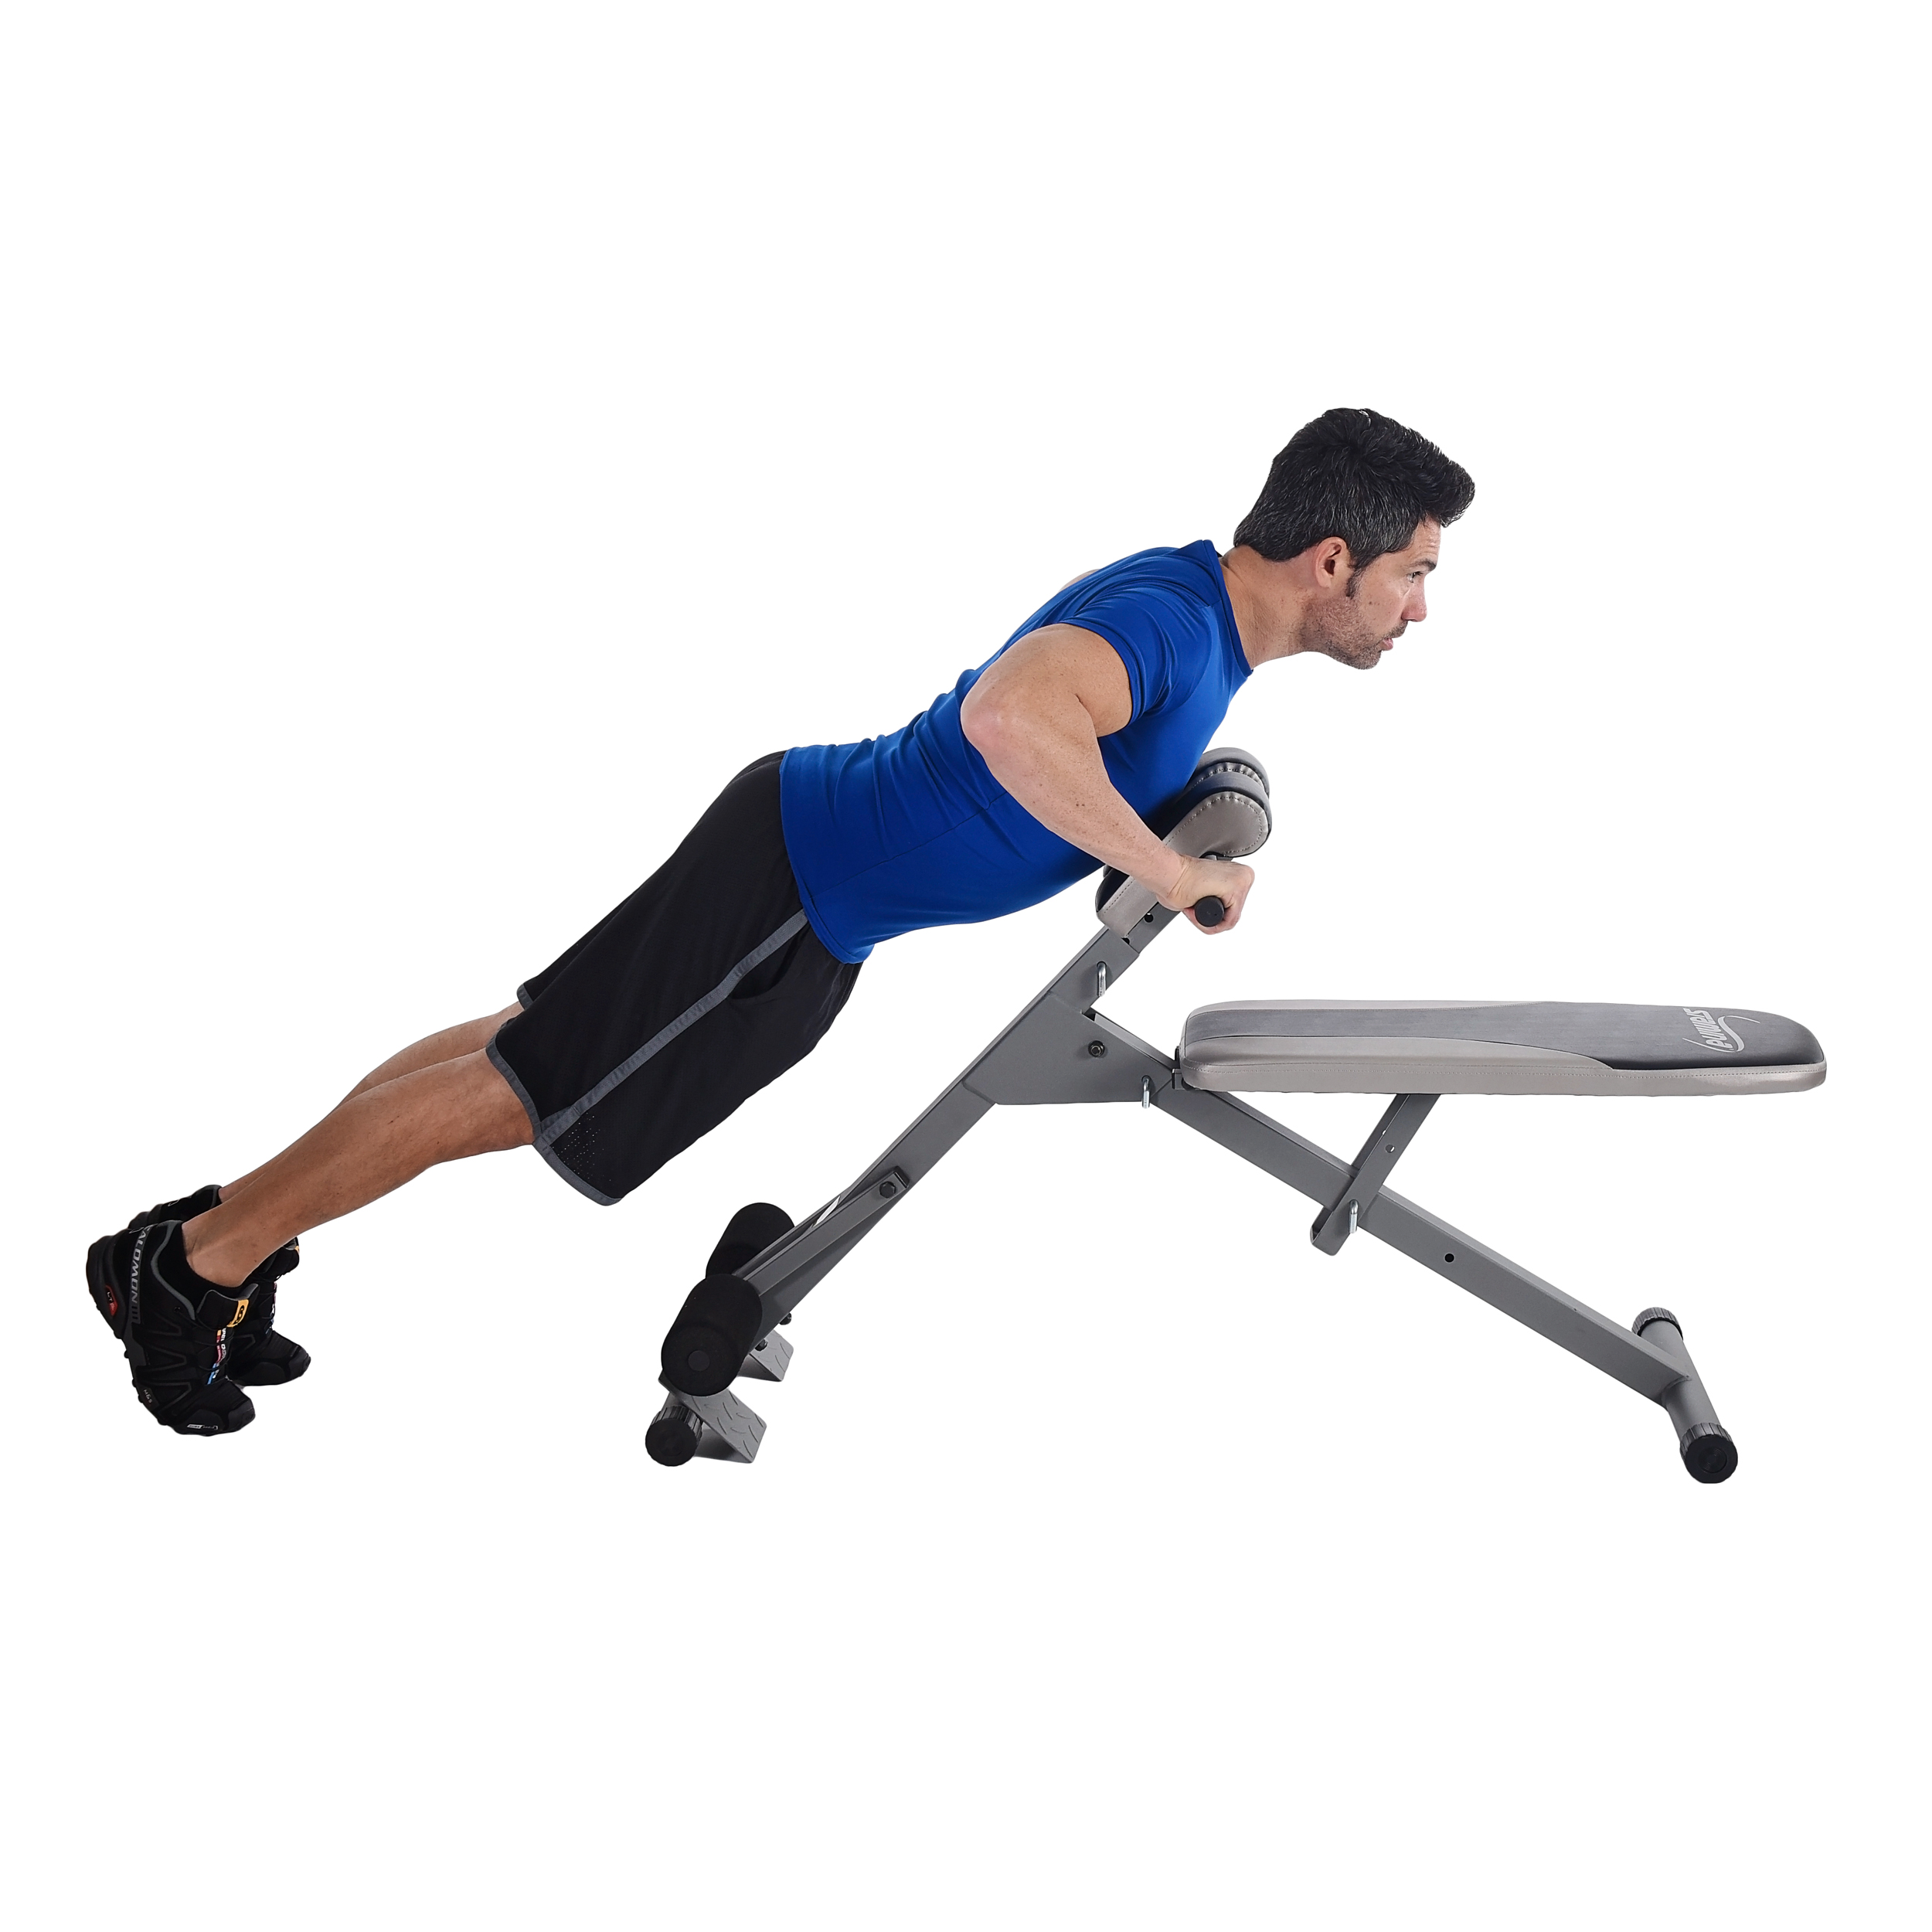 Roman chair sit-up on a flat bench exercise instructions and video